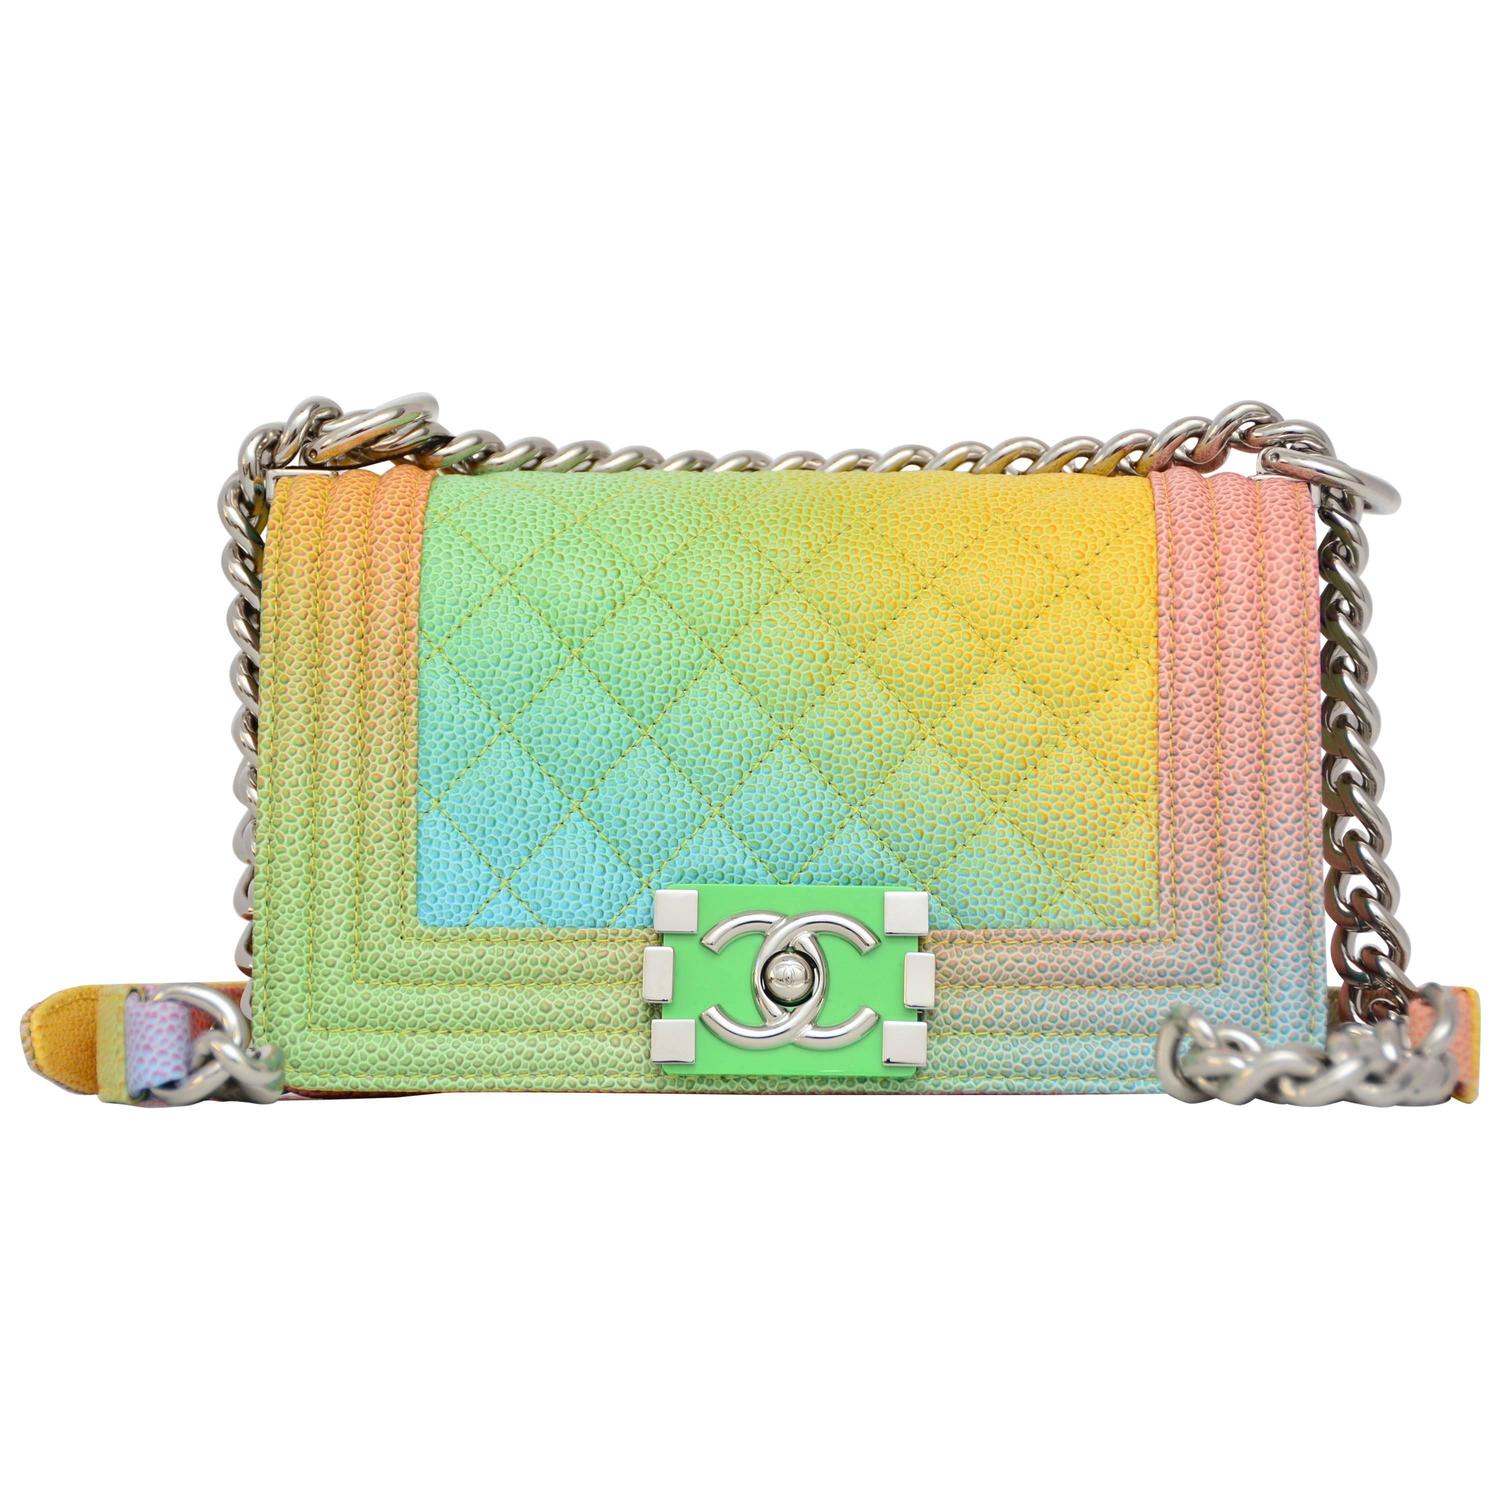 Chanel Rainbow Chanel Boy Handbag Small &#39;17 Crossbody NEW Sold Out For Sale at 1stdibs